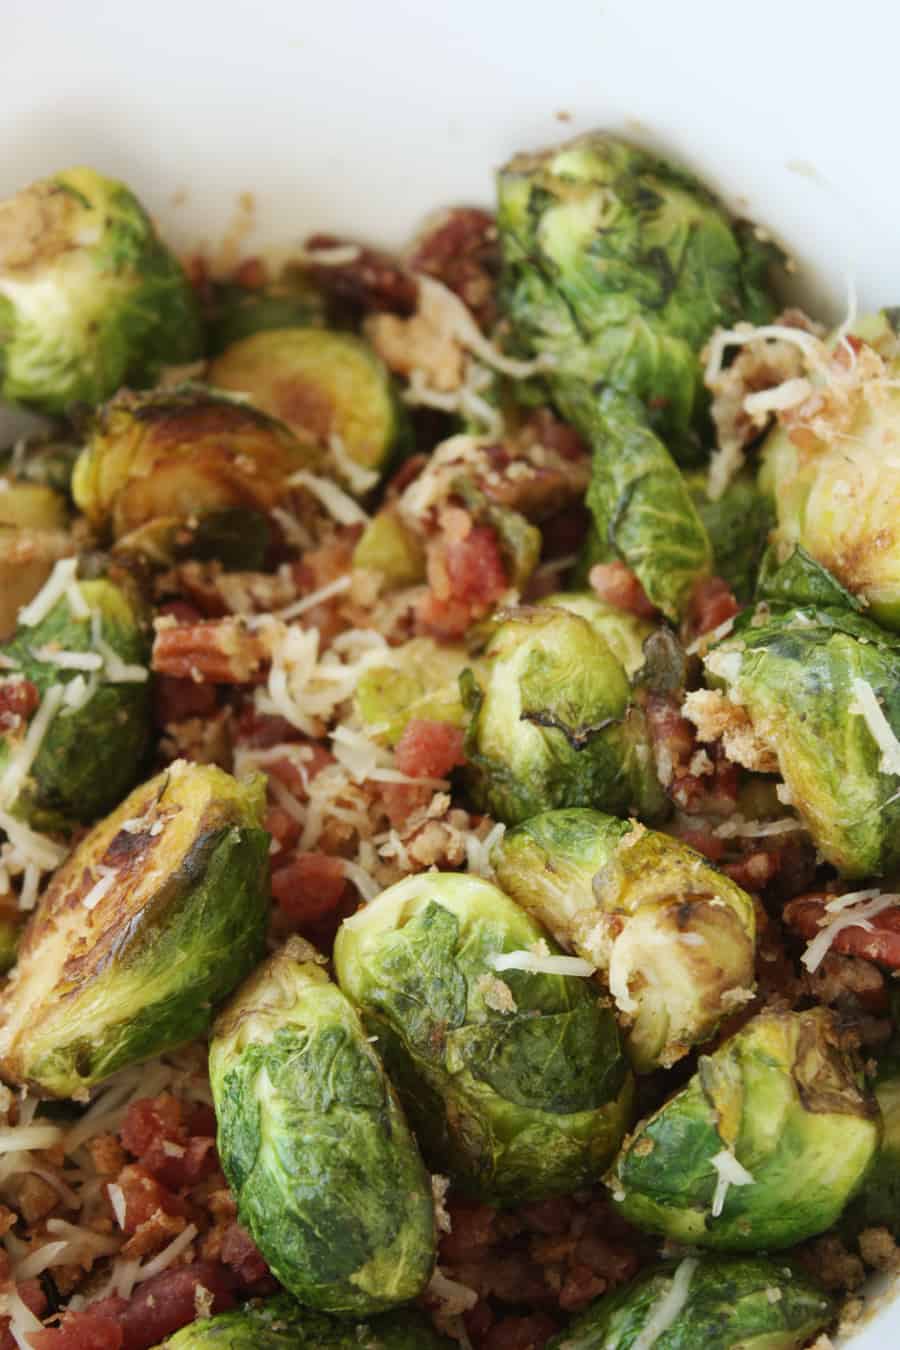 Pan fried brussel sprouts with all the fixings: I used to hate brussel sprouts, but now? I absolutely love and crave them. This recipe is definitely one to repeat!Pan fried brussel sprouts with all the fixings: I used to hate brussel sprouts, but now? I absolutely love and crave them. This recipe is definitely one to repeat! | via Autumn All Along